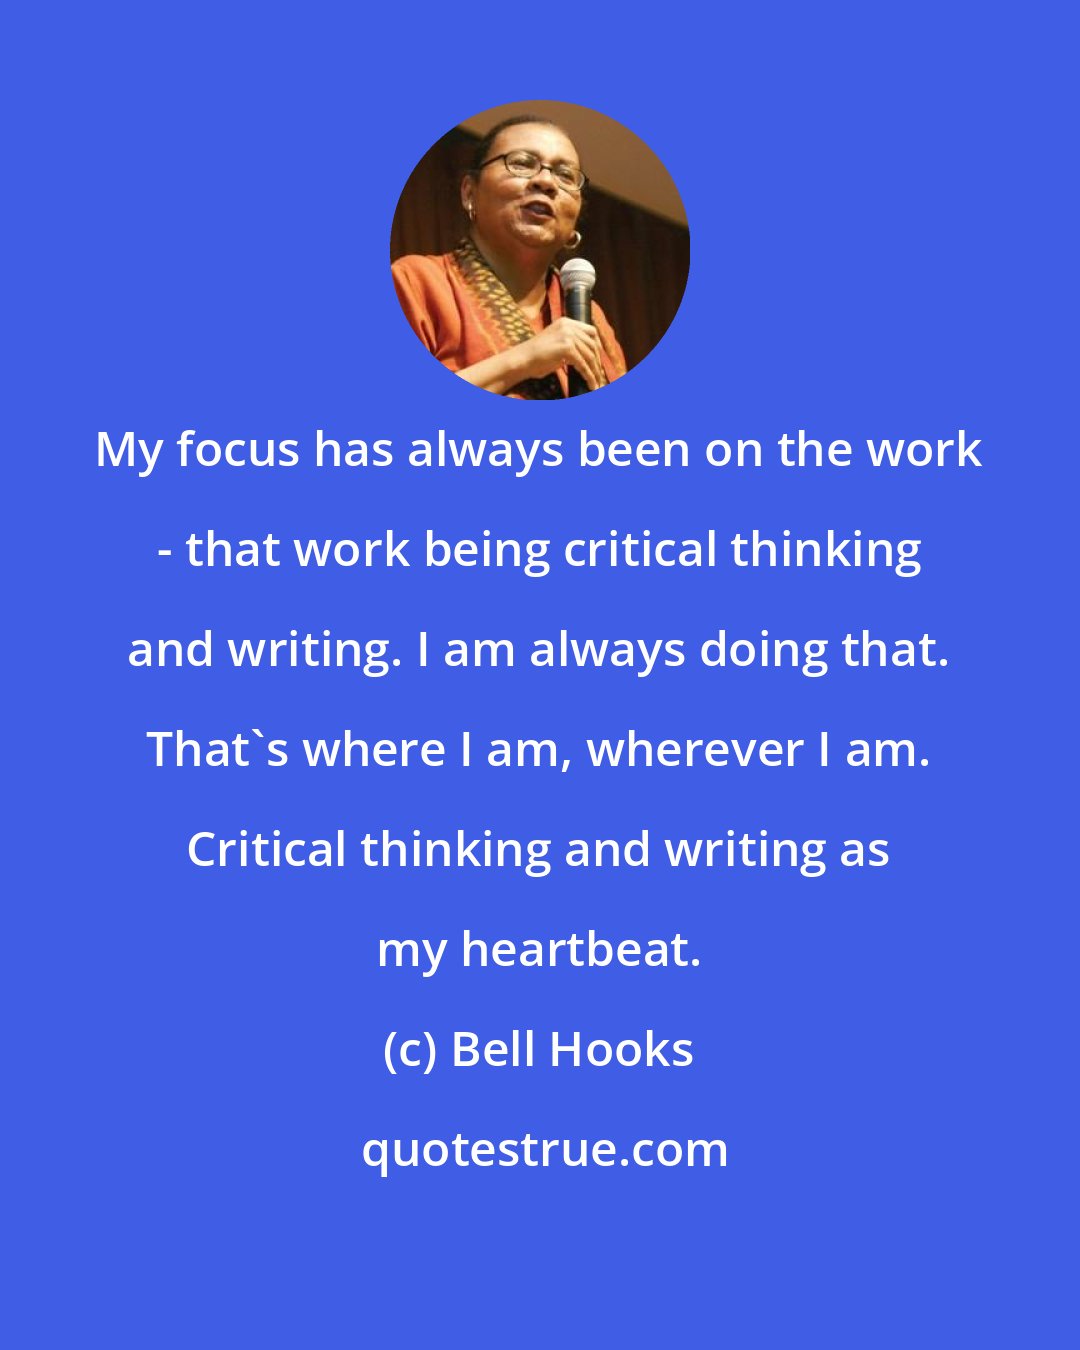 Bell Hooks: My focus has always been on the work - that work being critical thinking and writing. I am always doing that. That's where I am, wherever I am. Critical thinking and writing as my heartbeat.